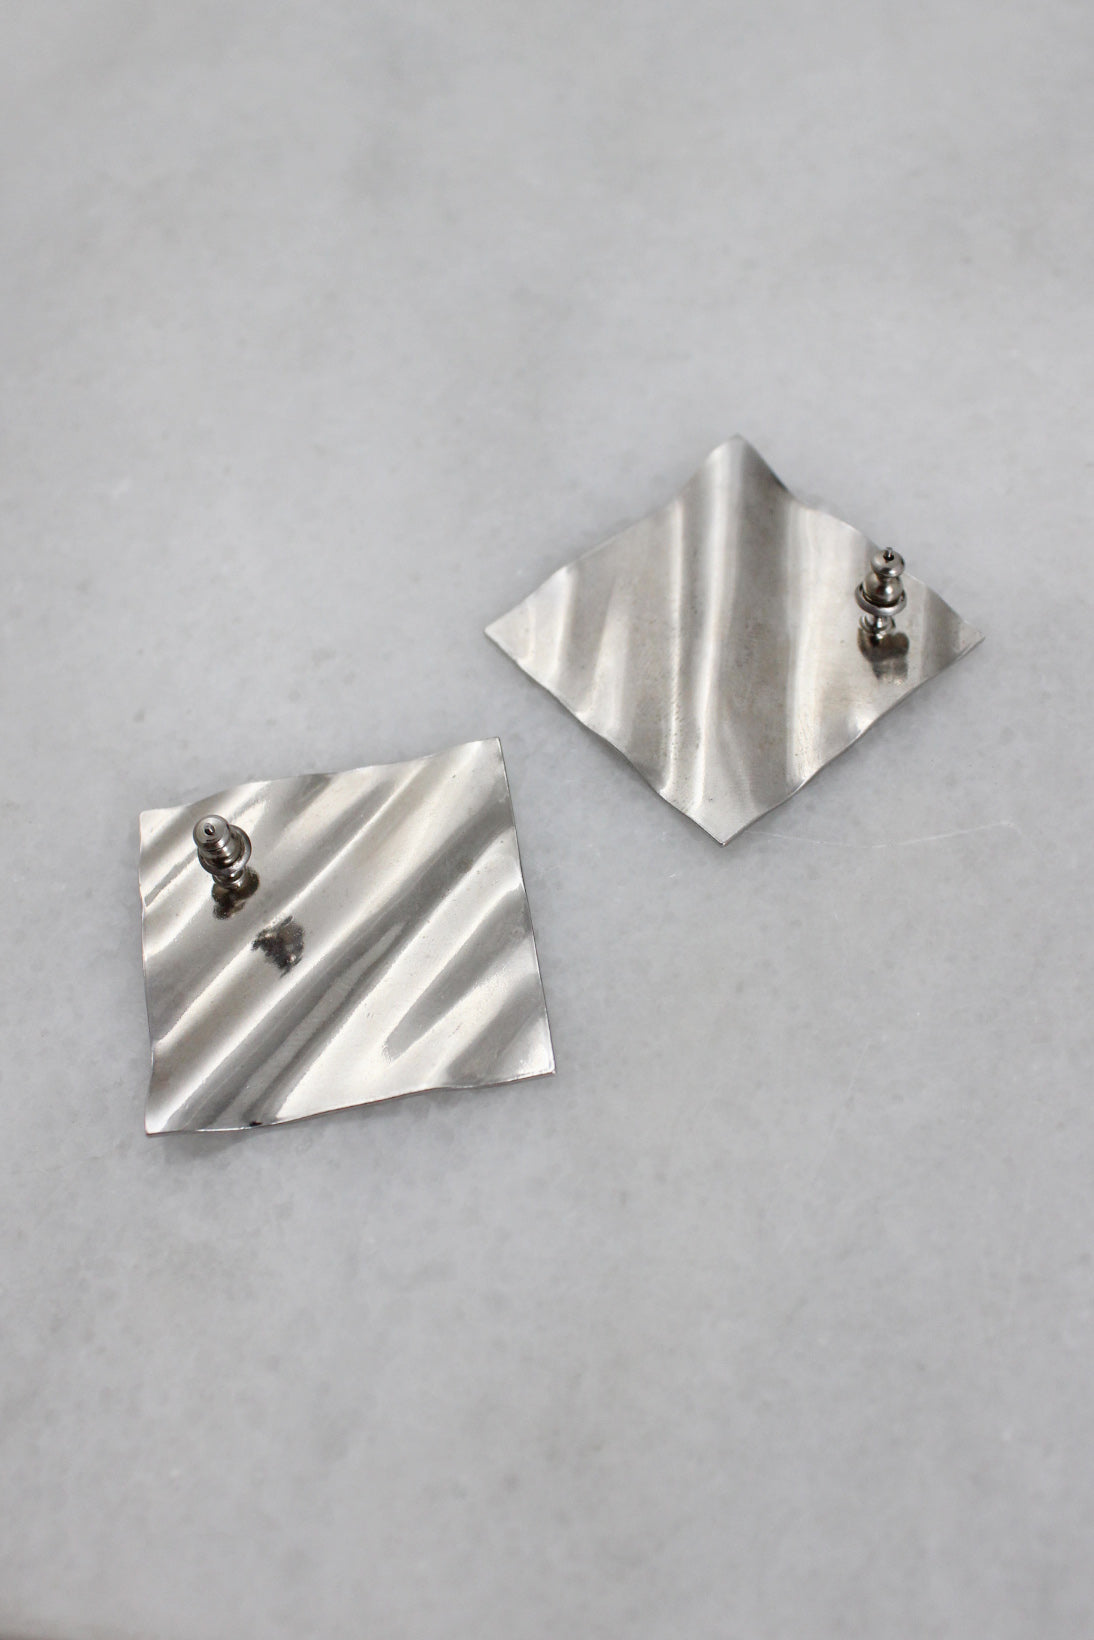 ¾ back of silver rippled earrings with push style backs laid flat.